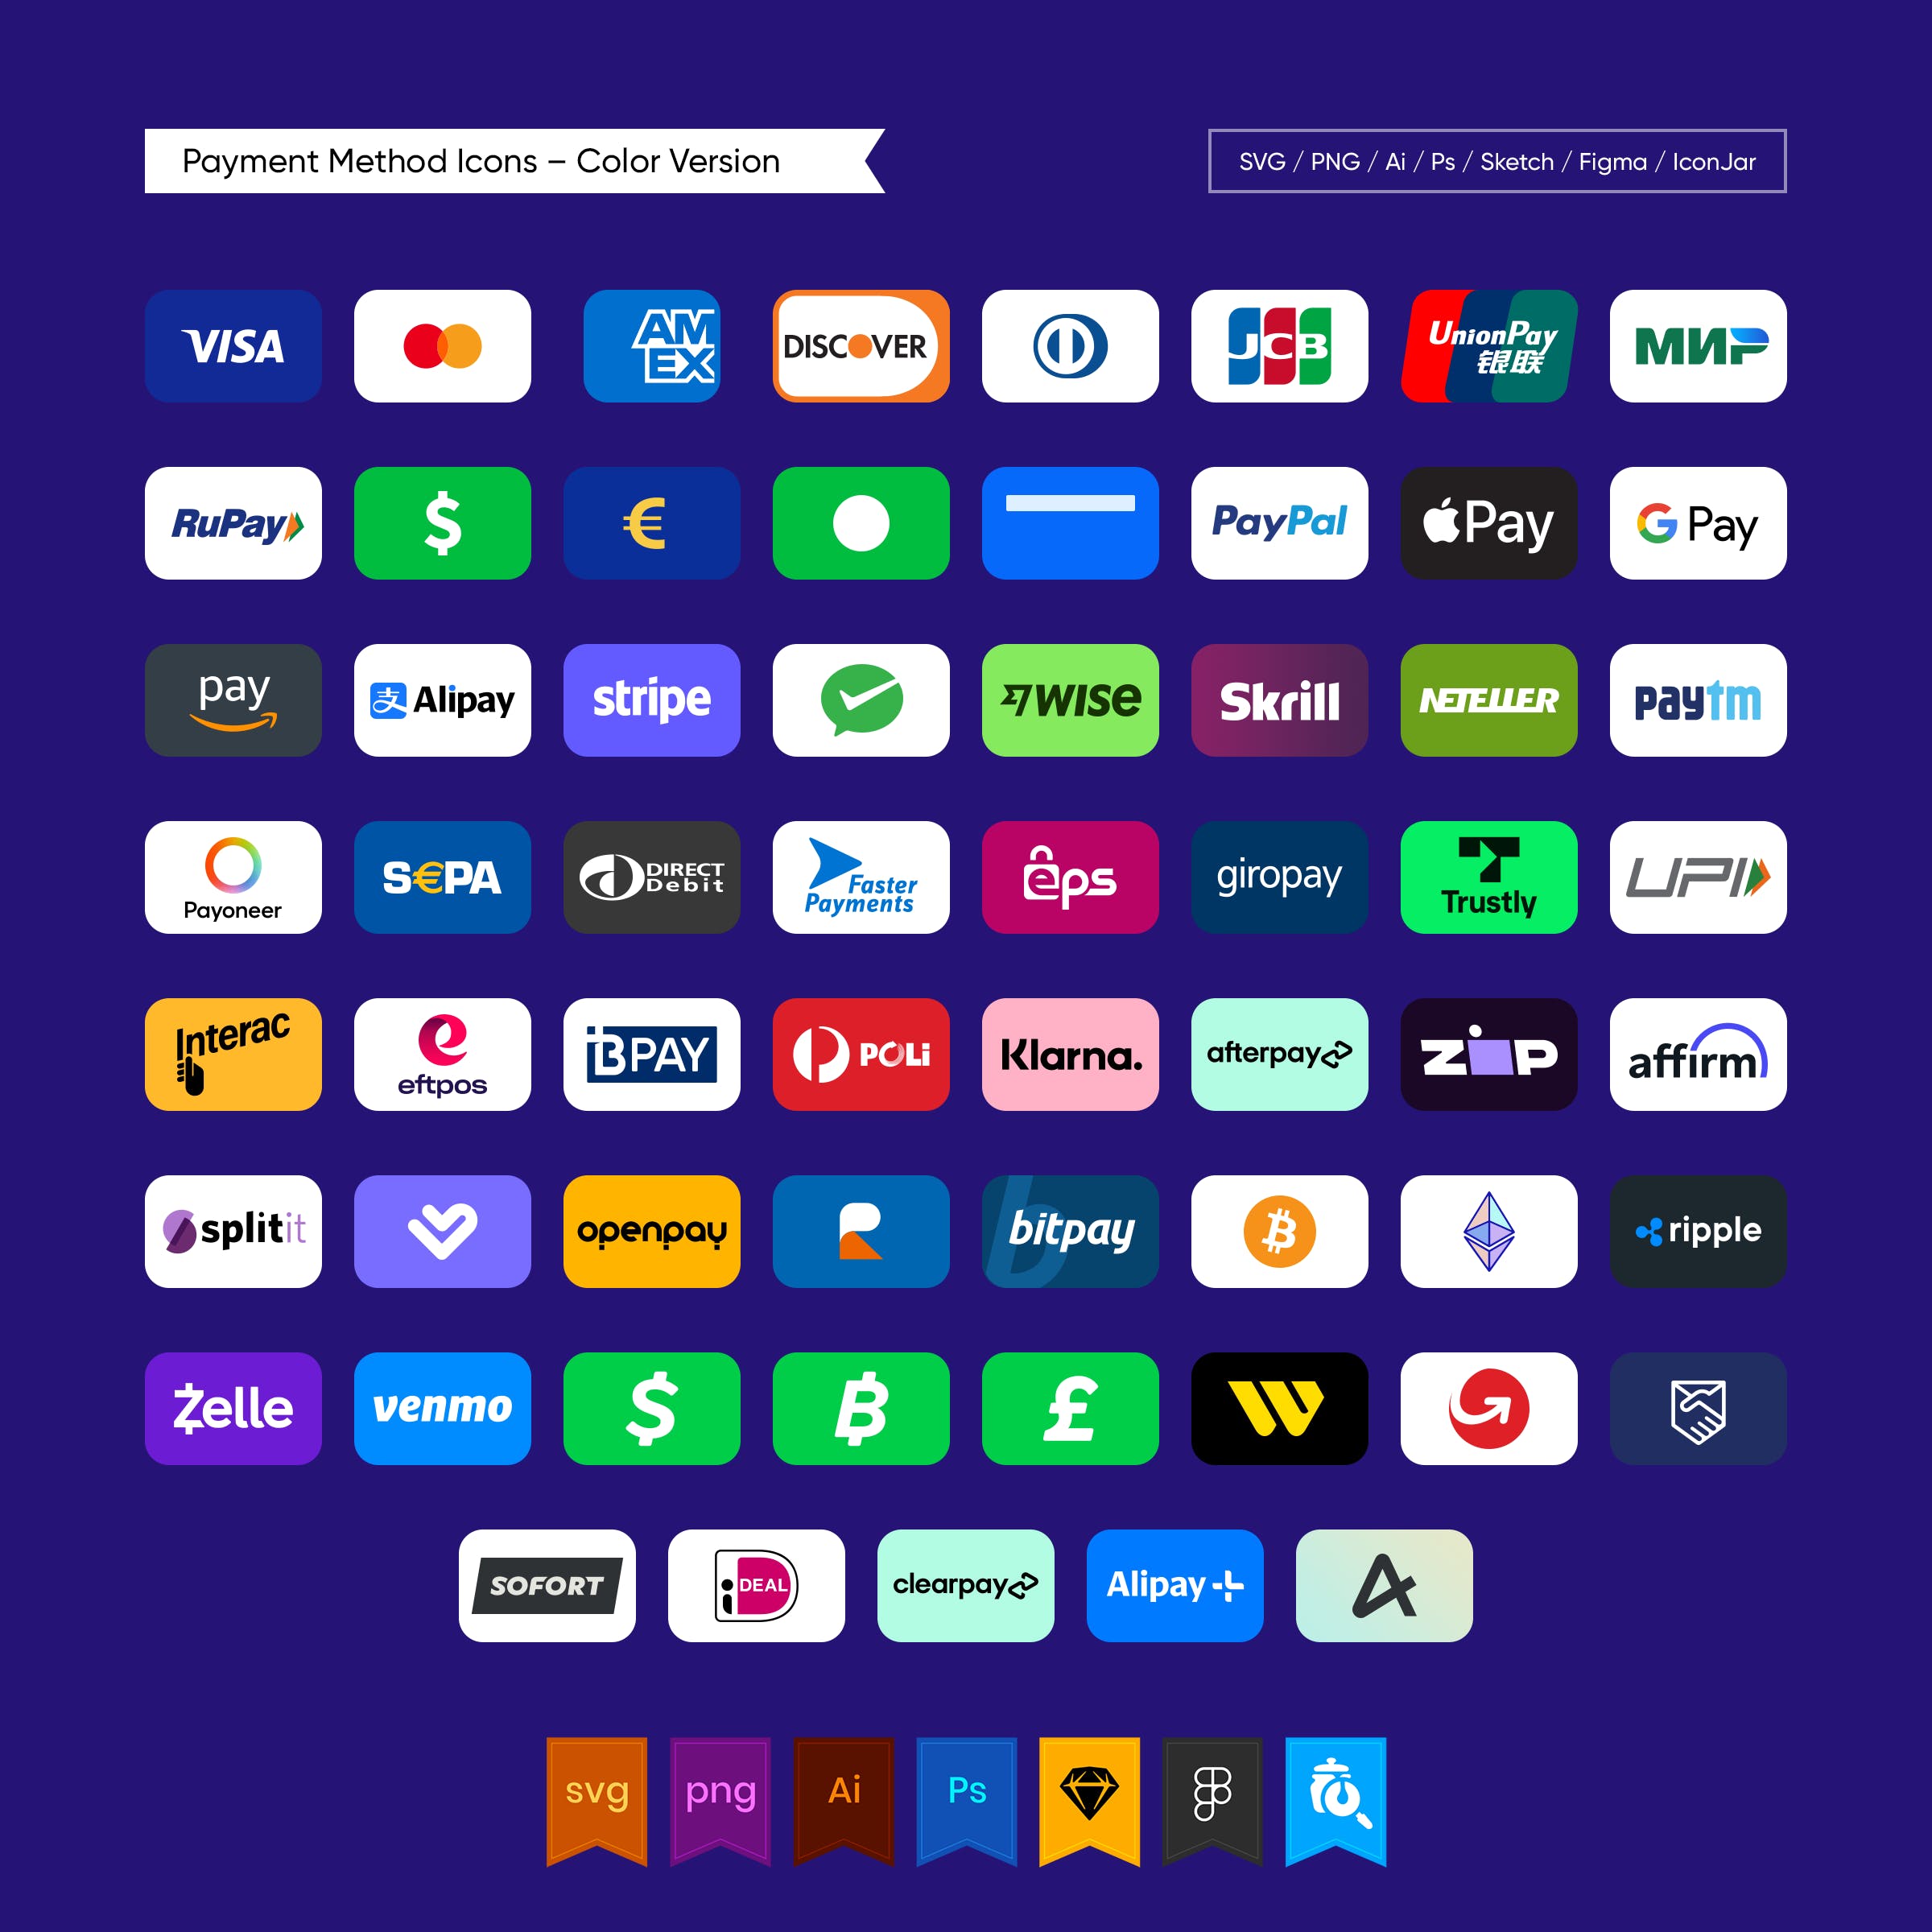 Payment Method Icons media 1